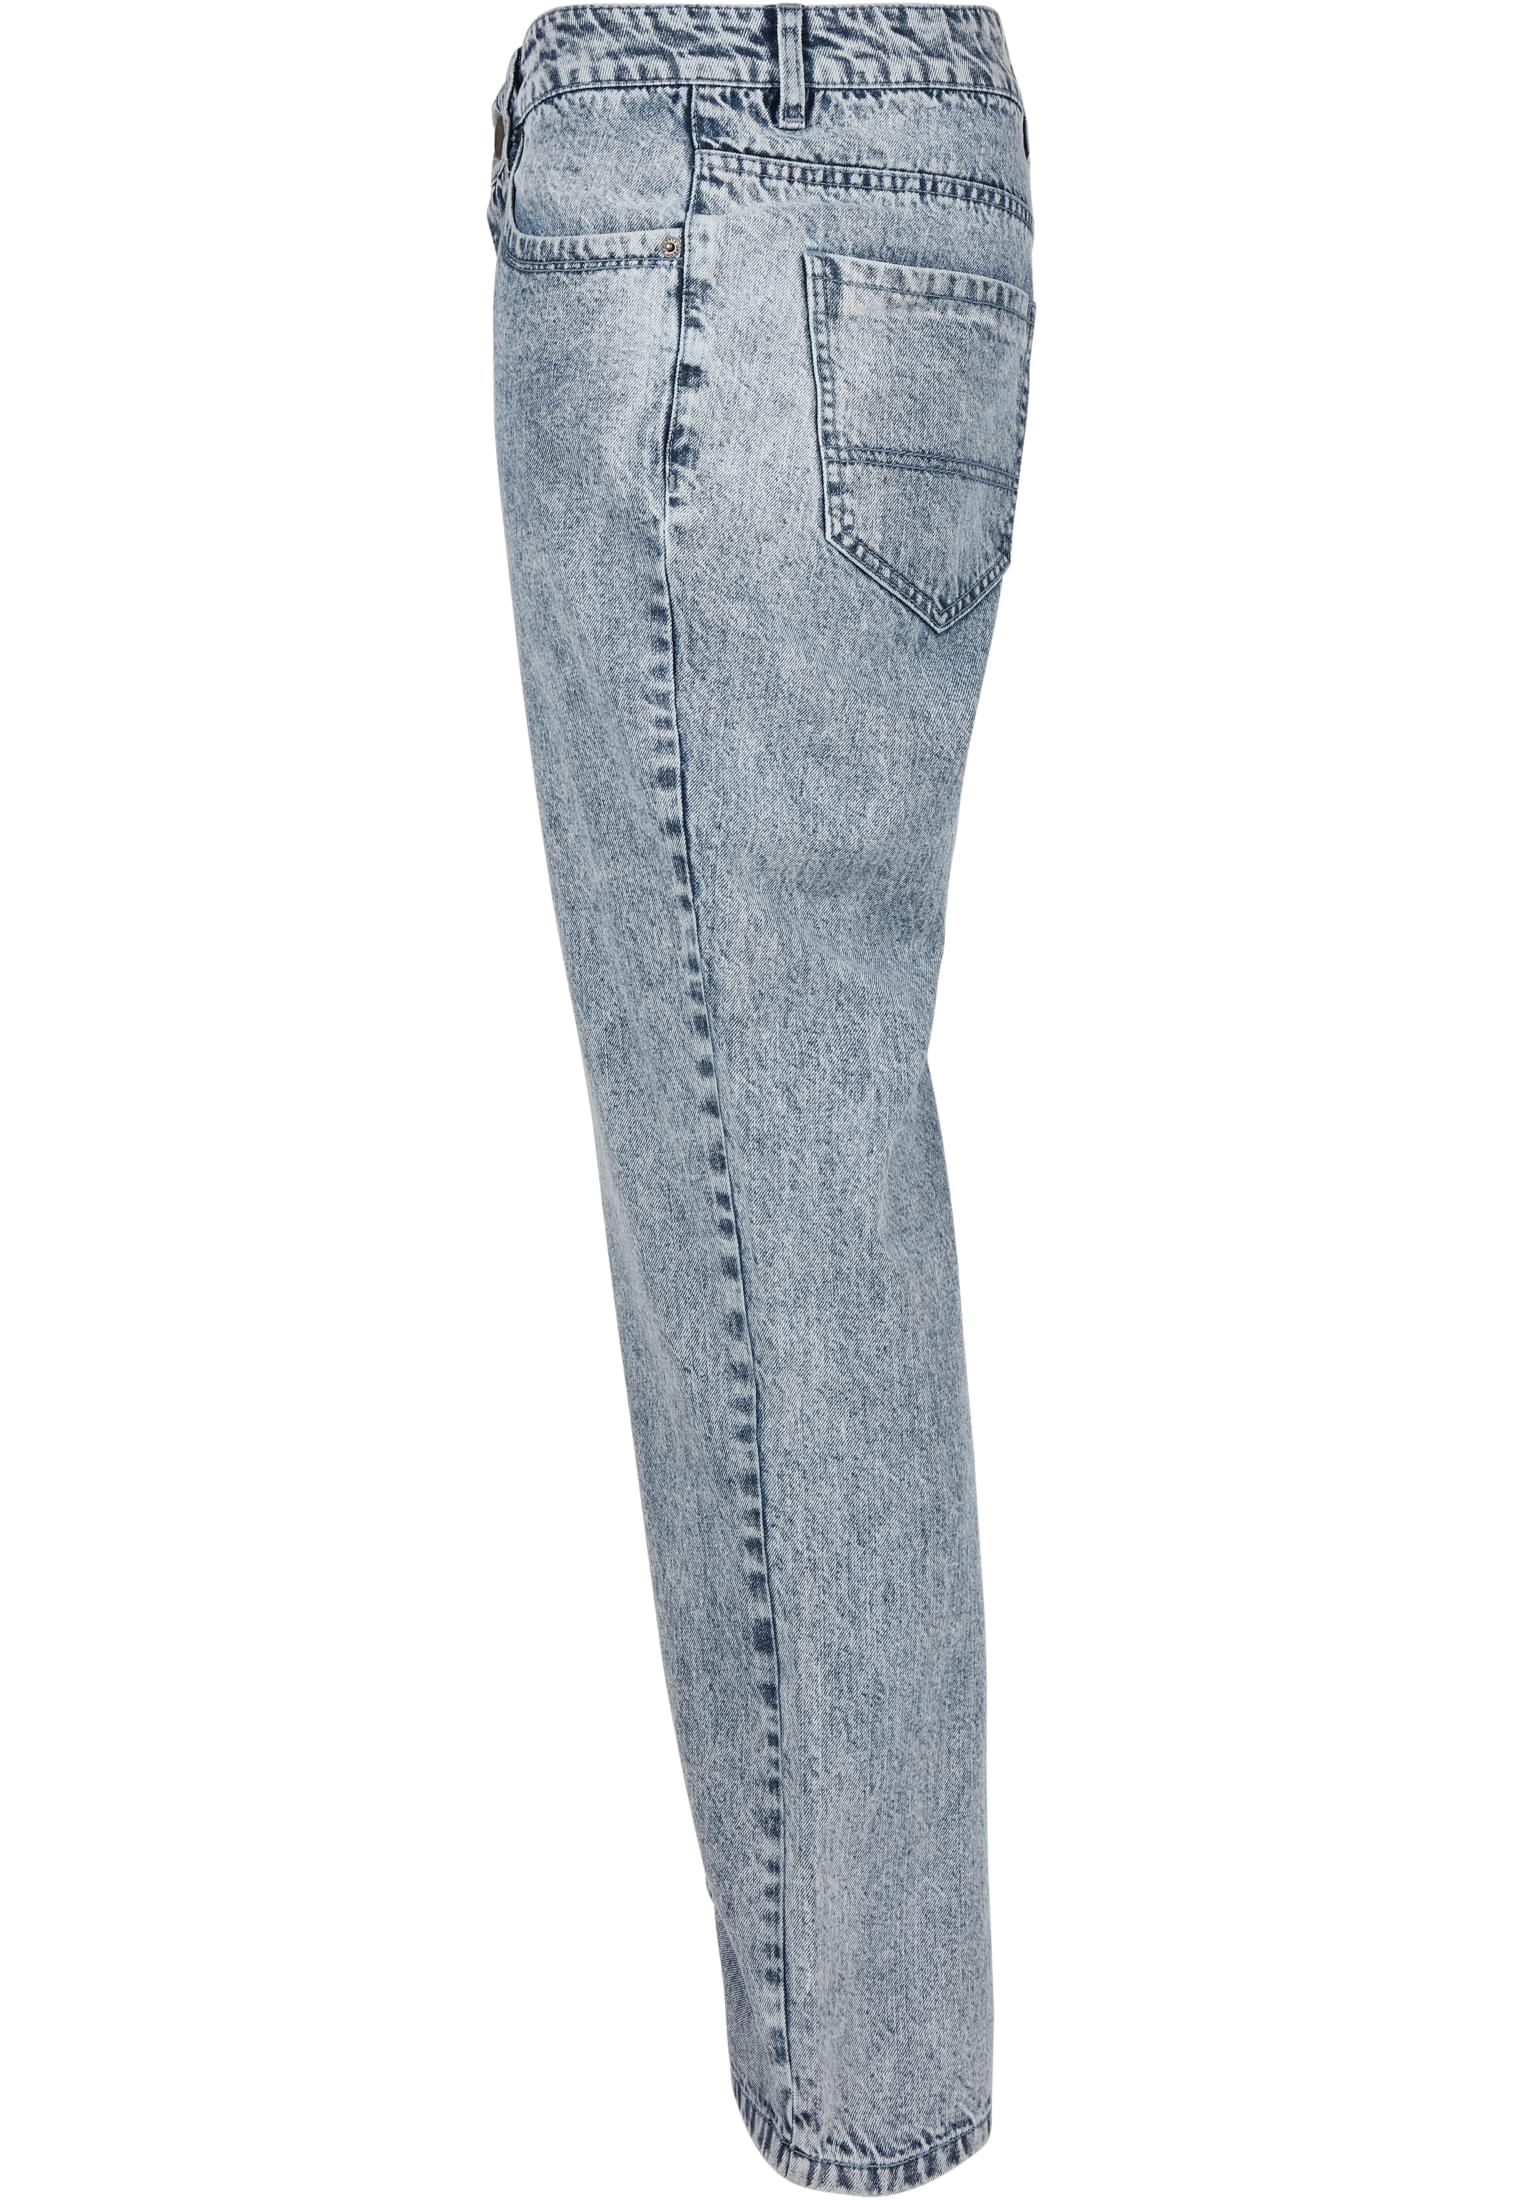 Hosen Loose Fit Jeans in Farbe light skyblue acid washed